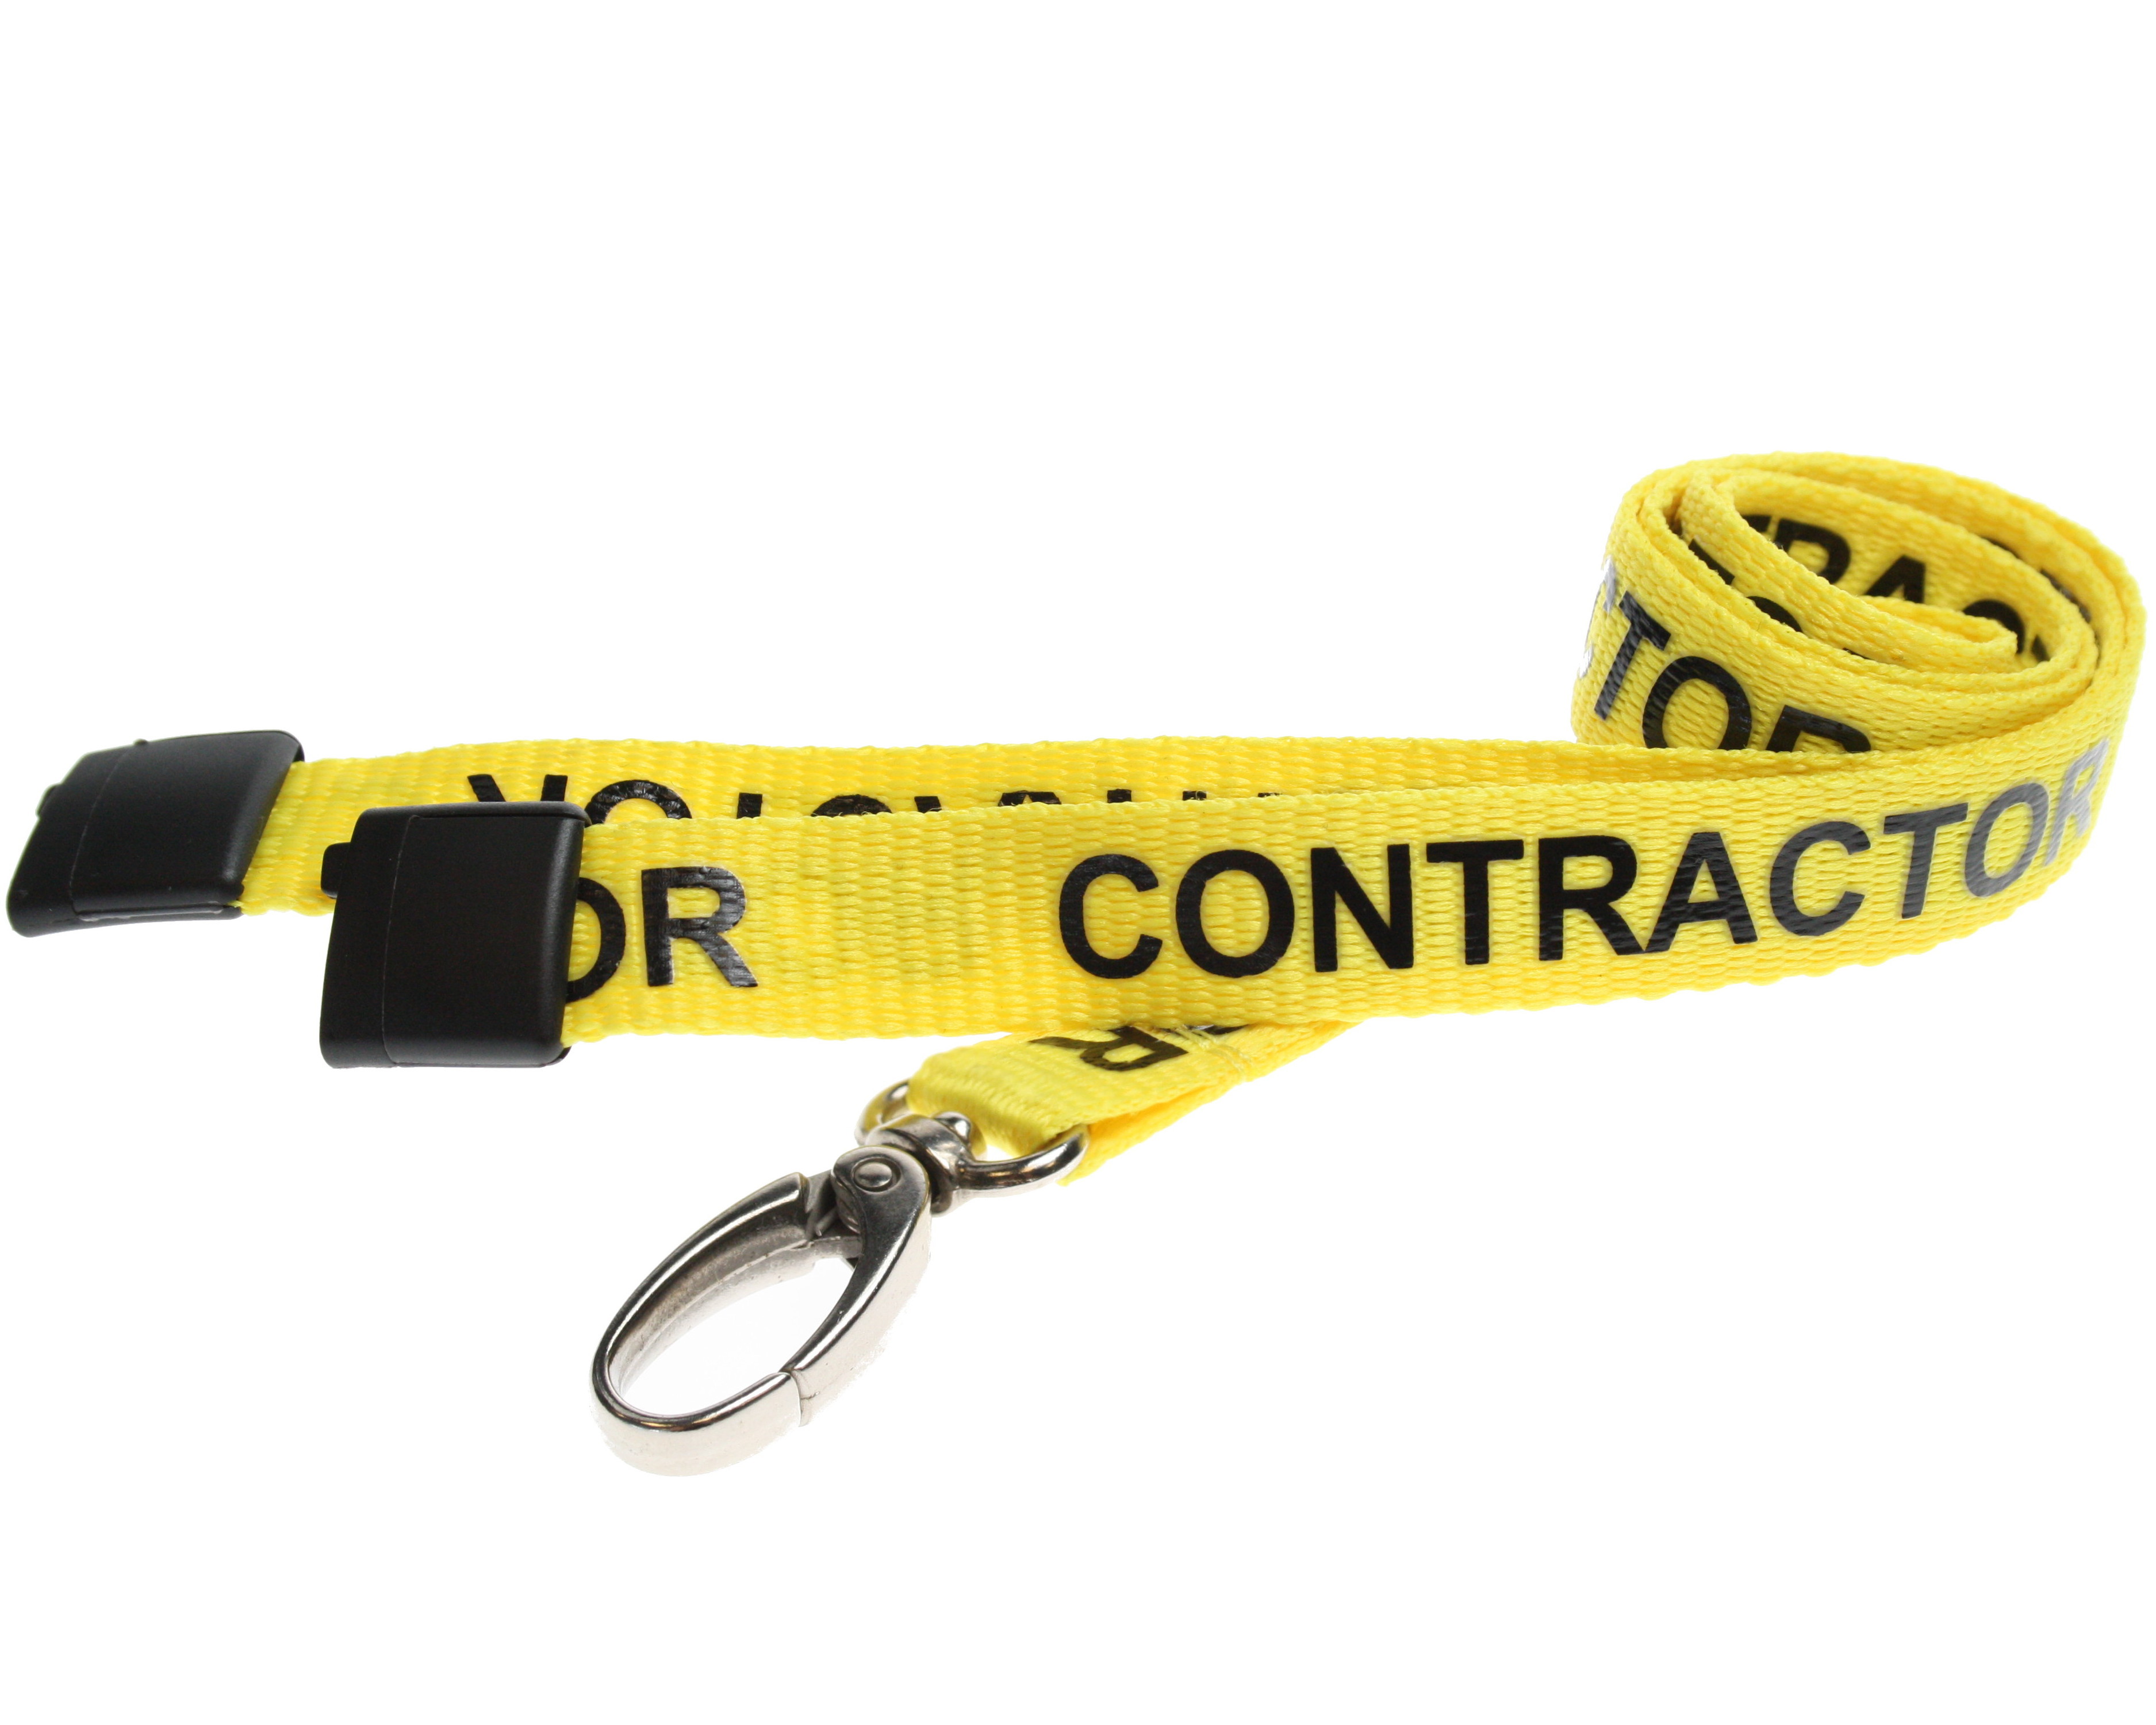 Job Title Printed Lanyards For Contractors